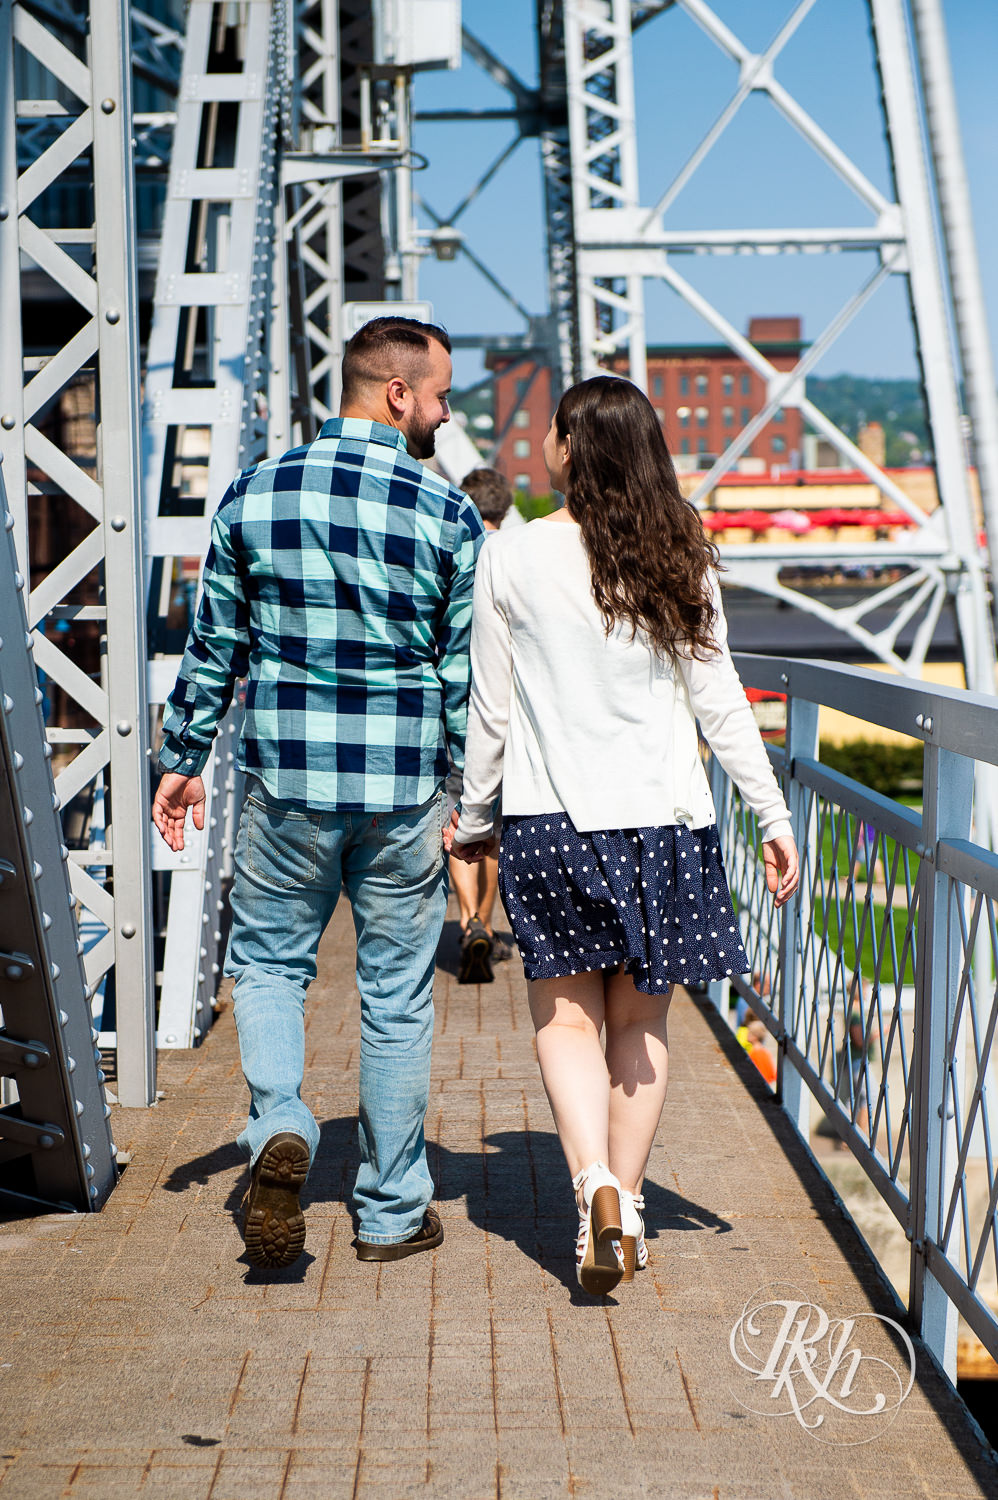 Man and woman walk holding hands in Canal Park in Duluth, Minnesota.